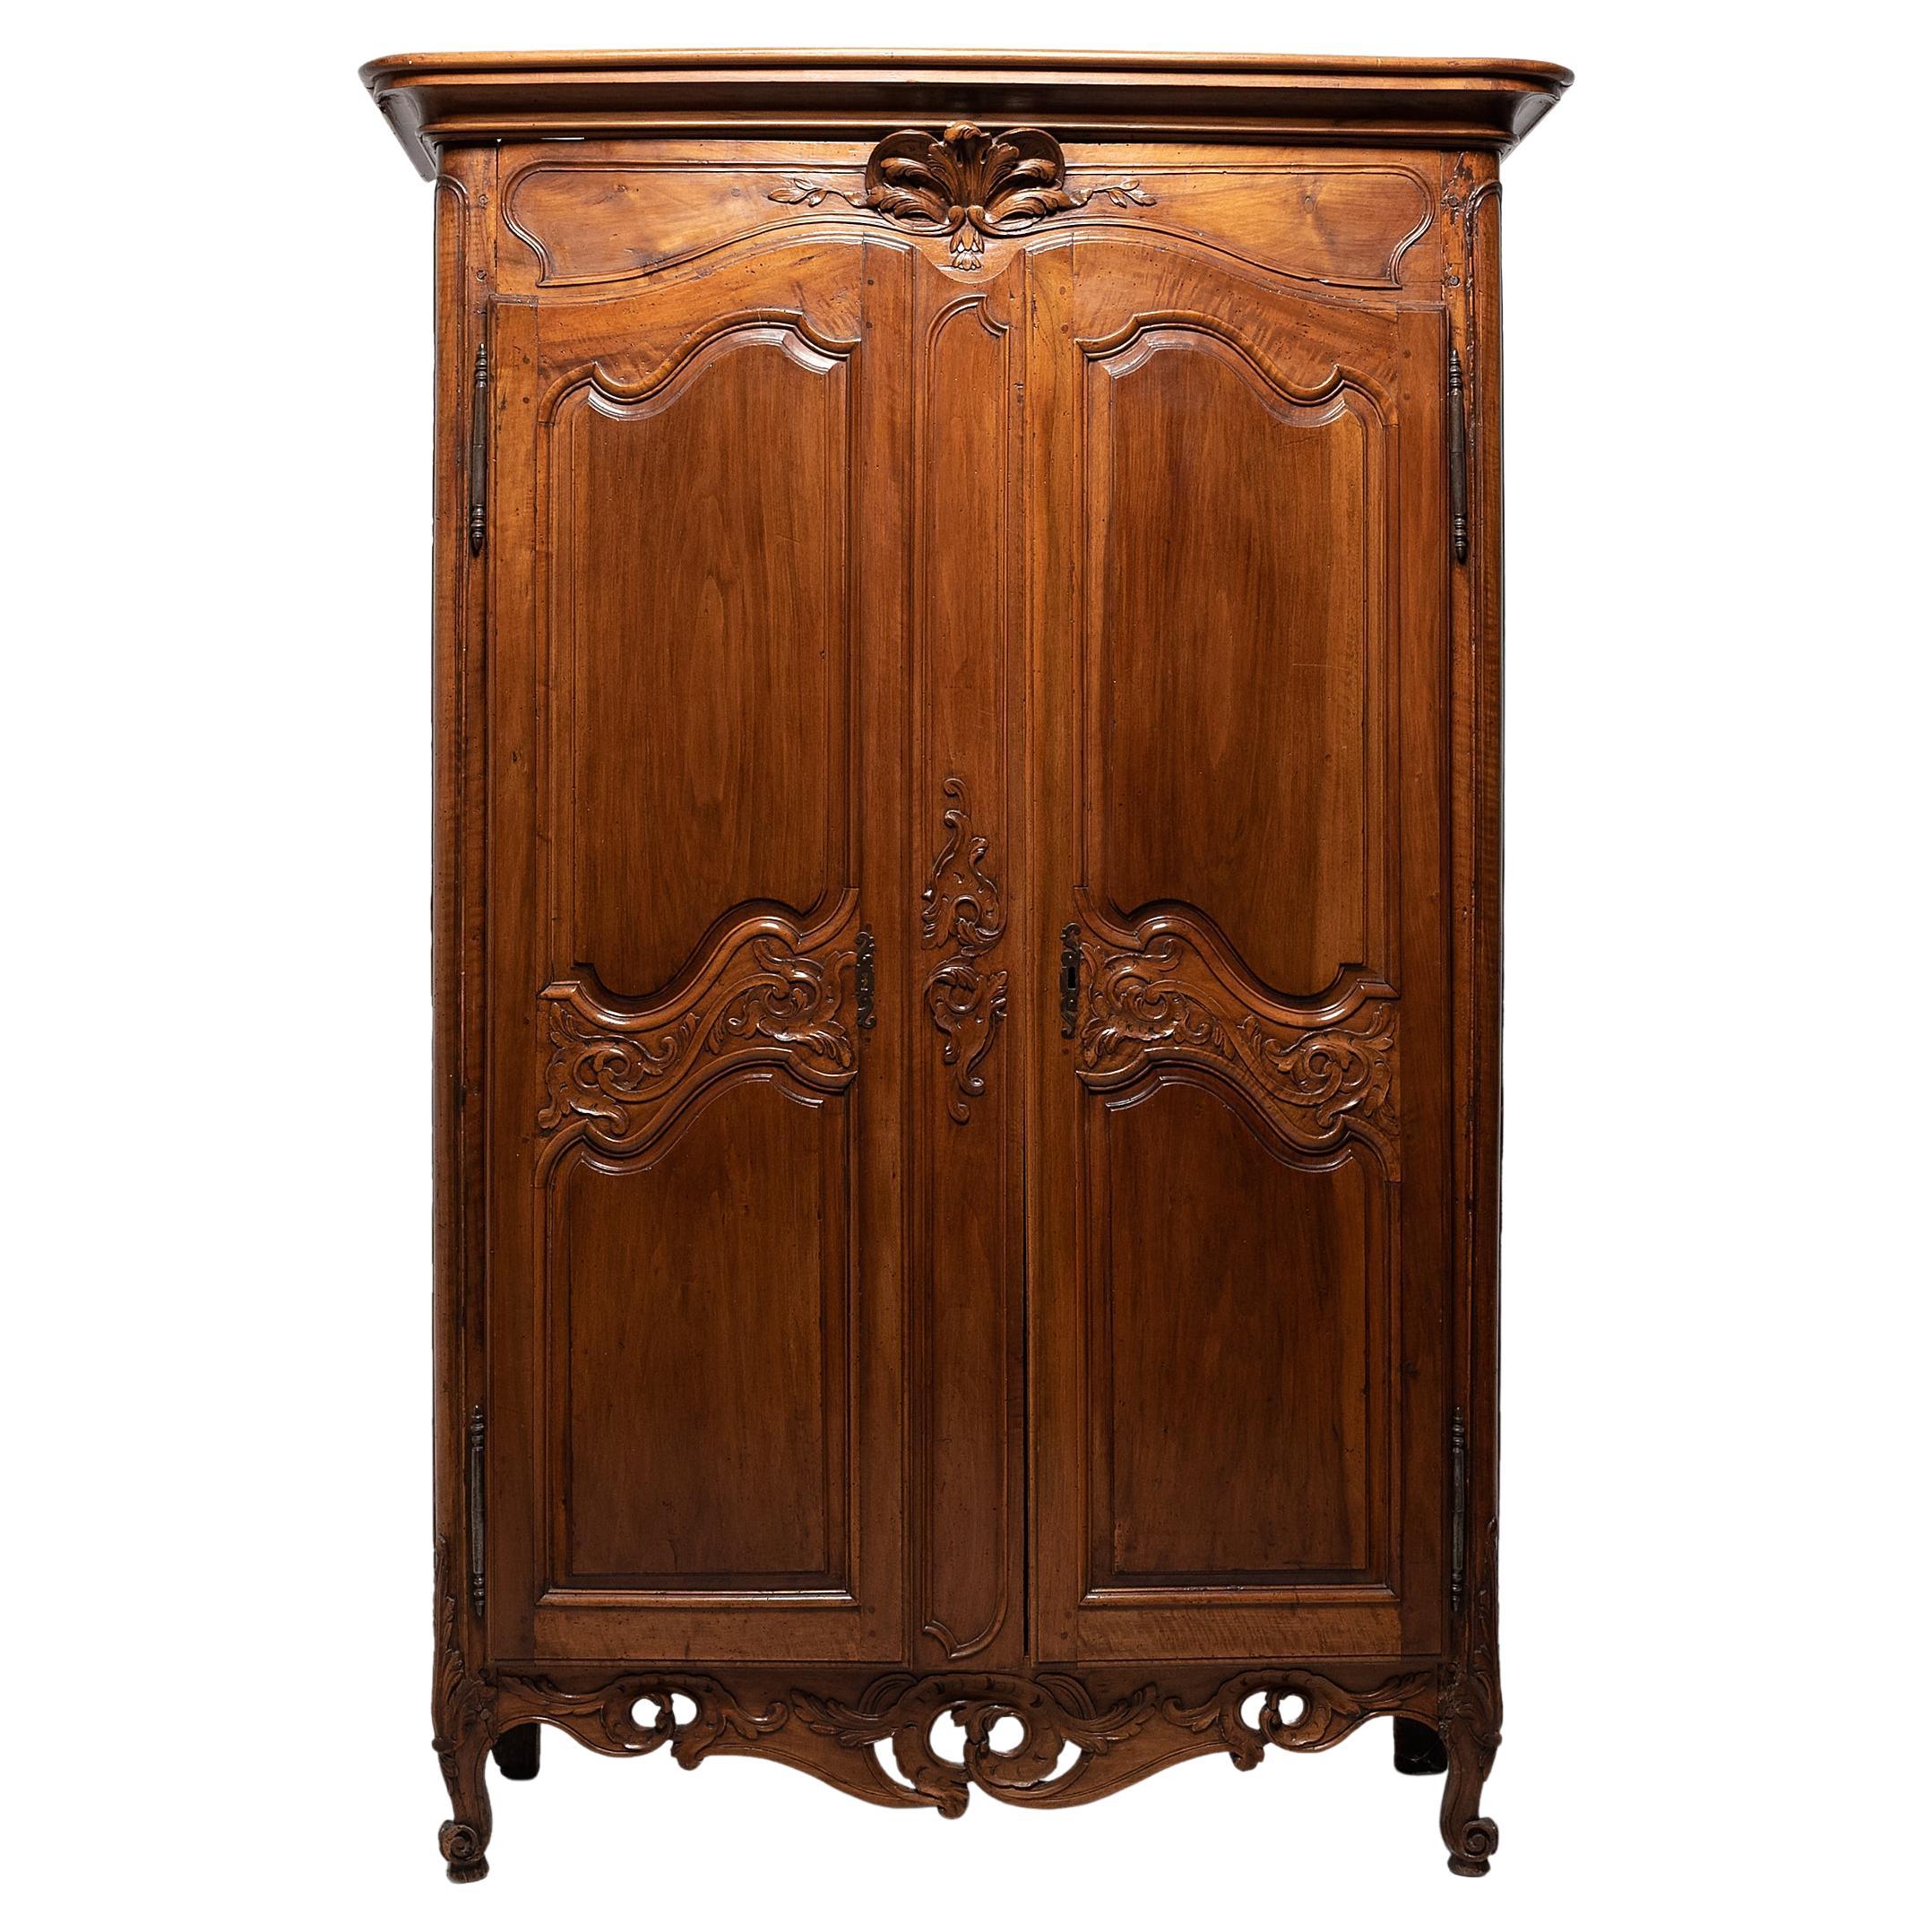 French Louis XV Provincial Fruitwood Armoire, c. 1800